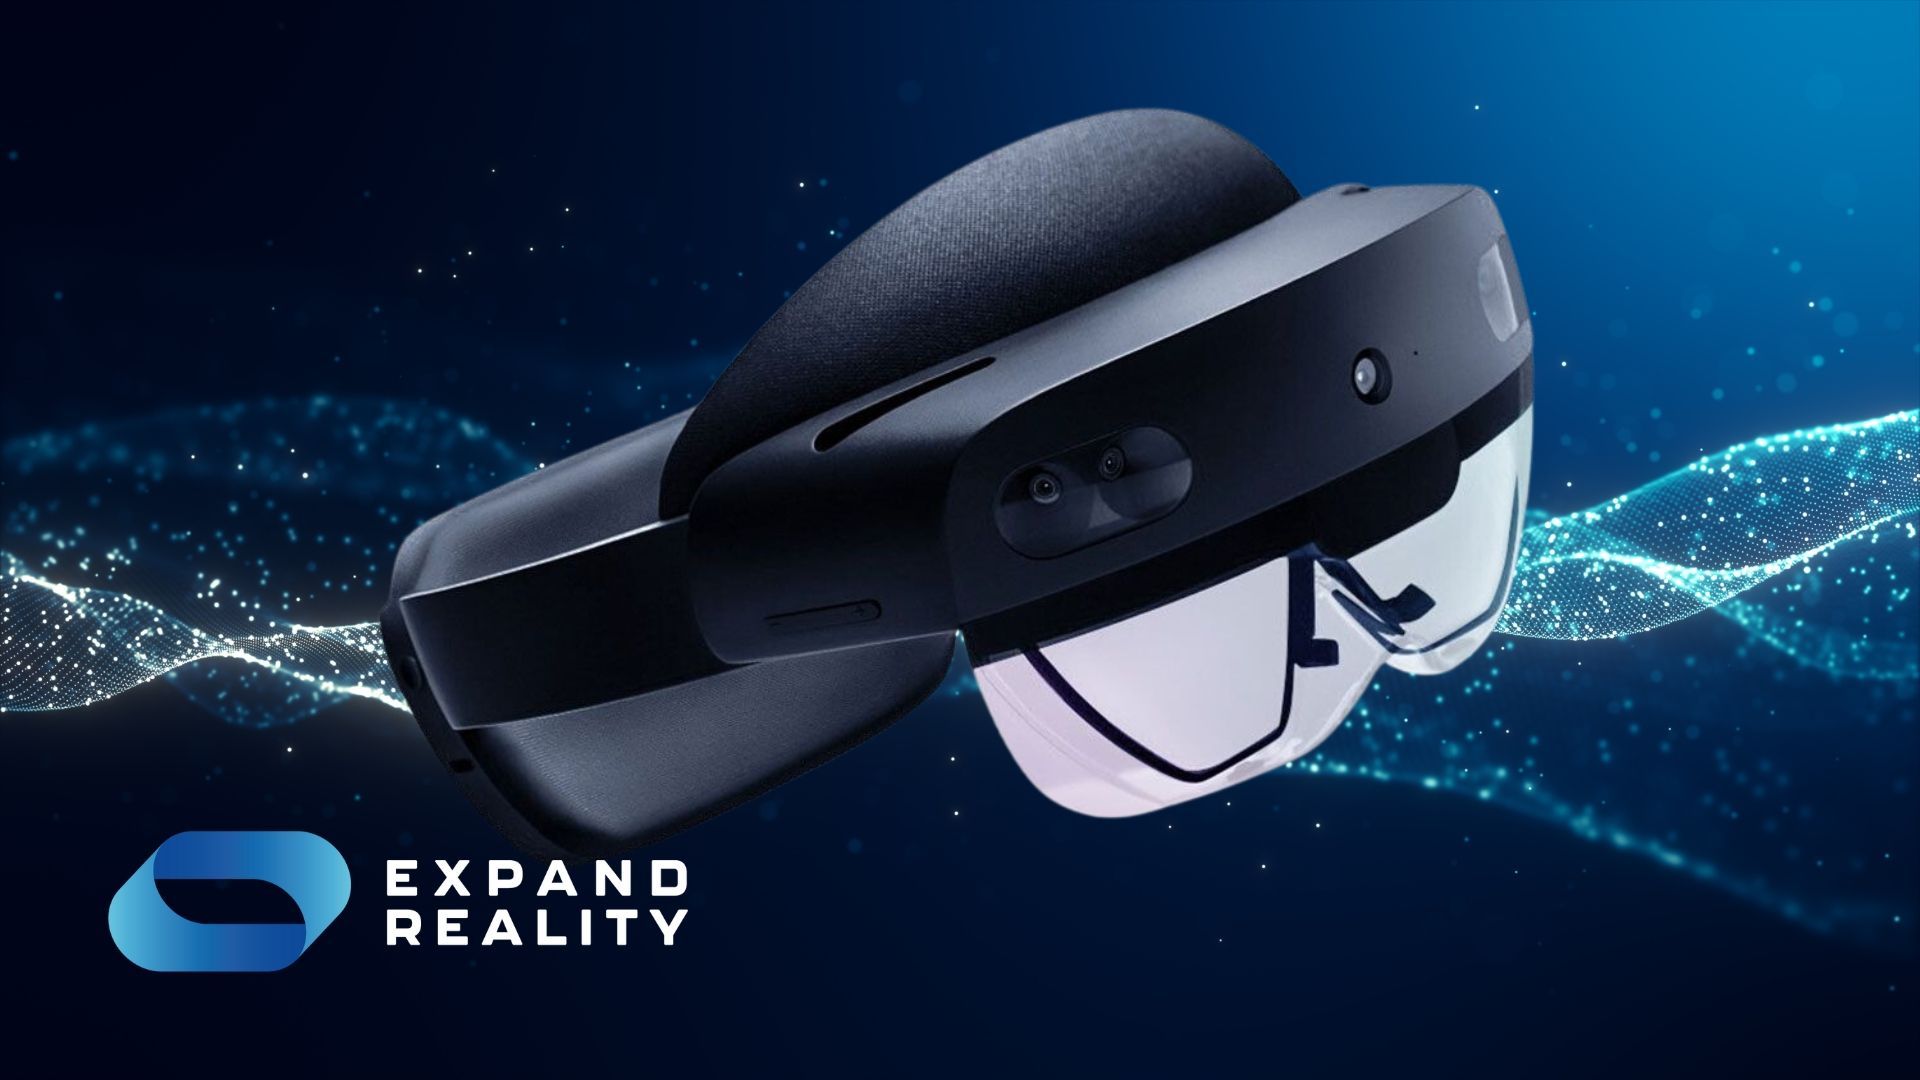 Discover some of the best business-ready applications available for the Microsoft HoloLens 2 and unlock its full potential for your workforce.